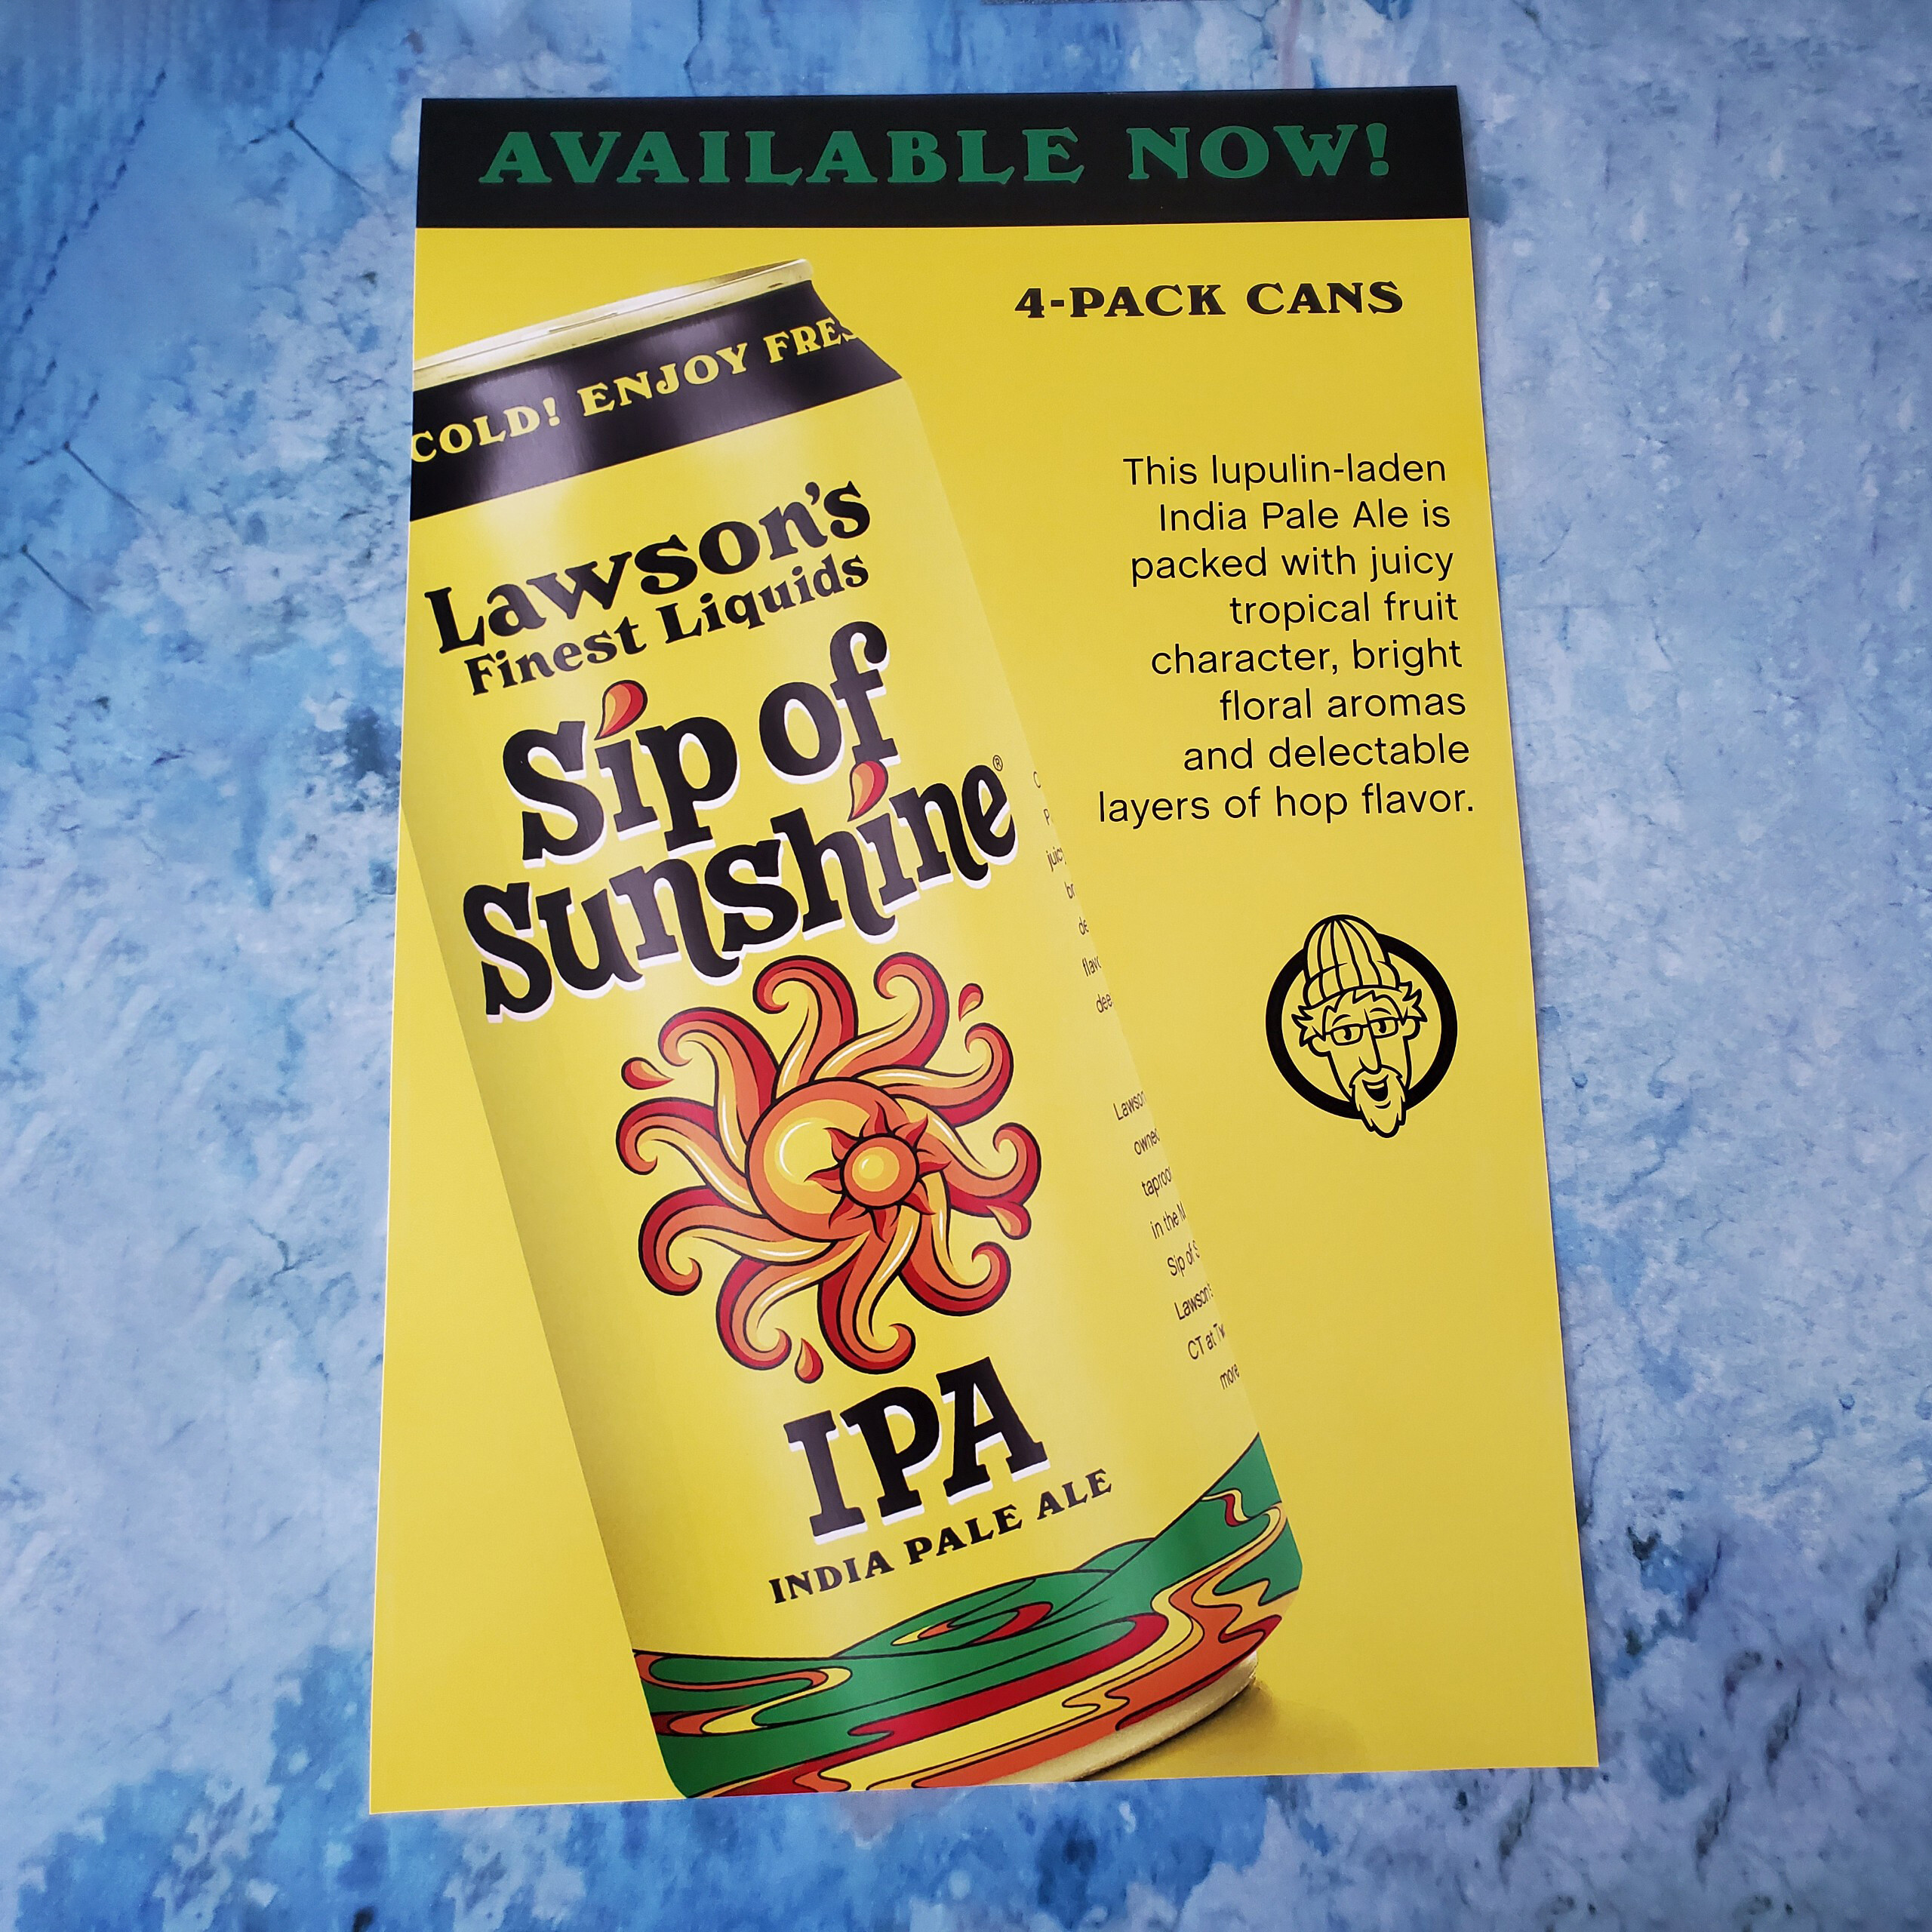 Printed Poster for Lawson's Finest Liquids Sip of Sunshine